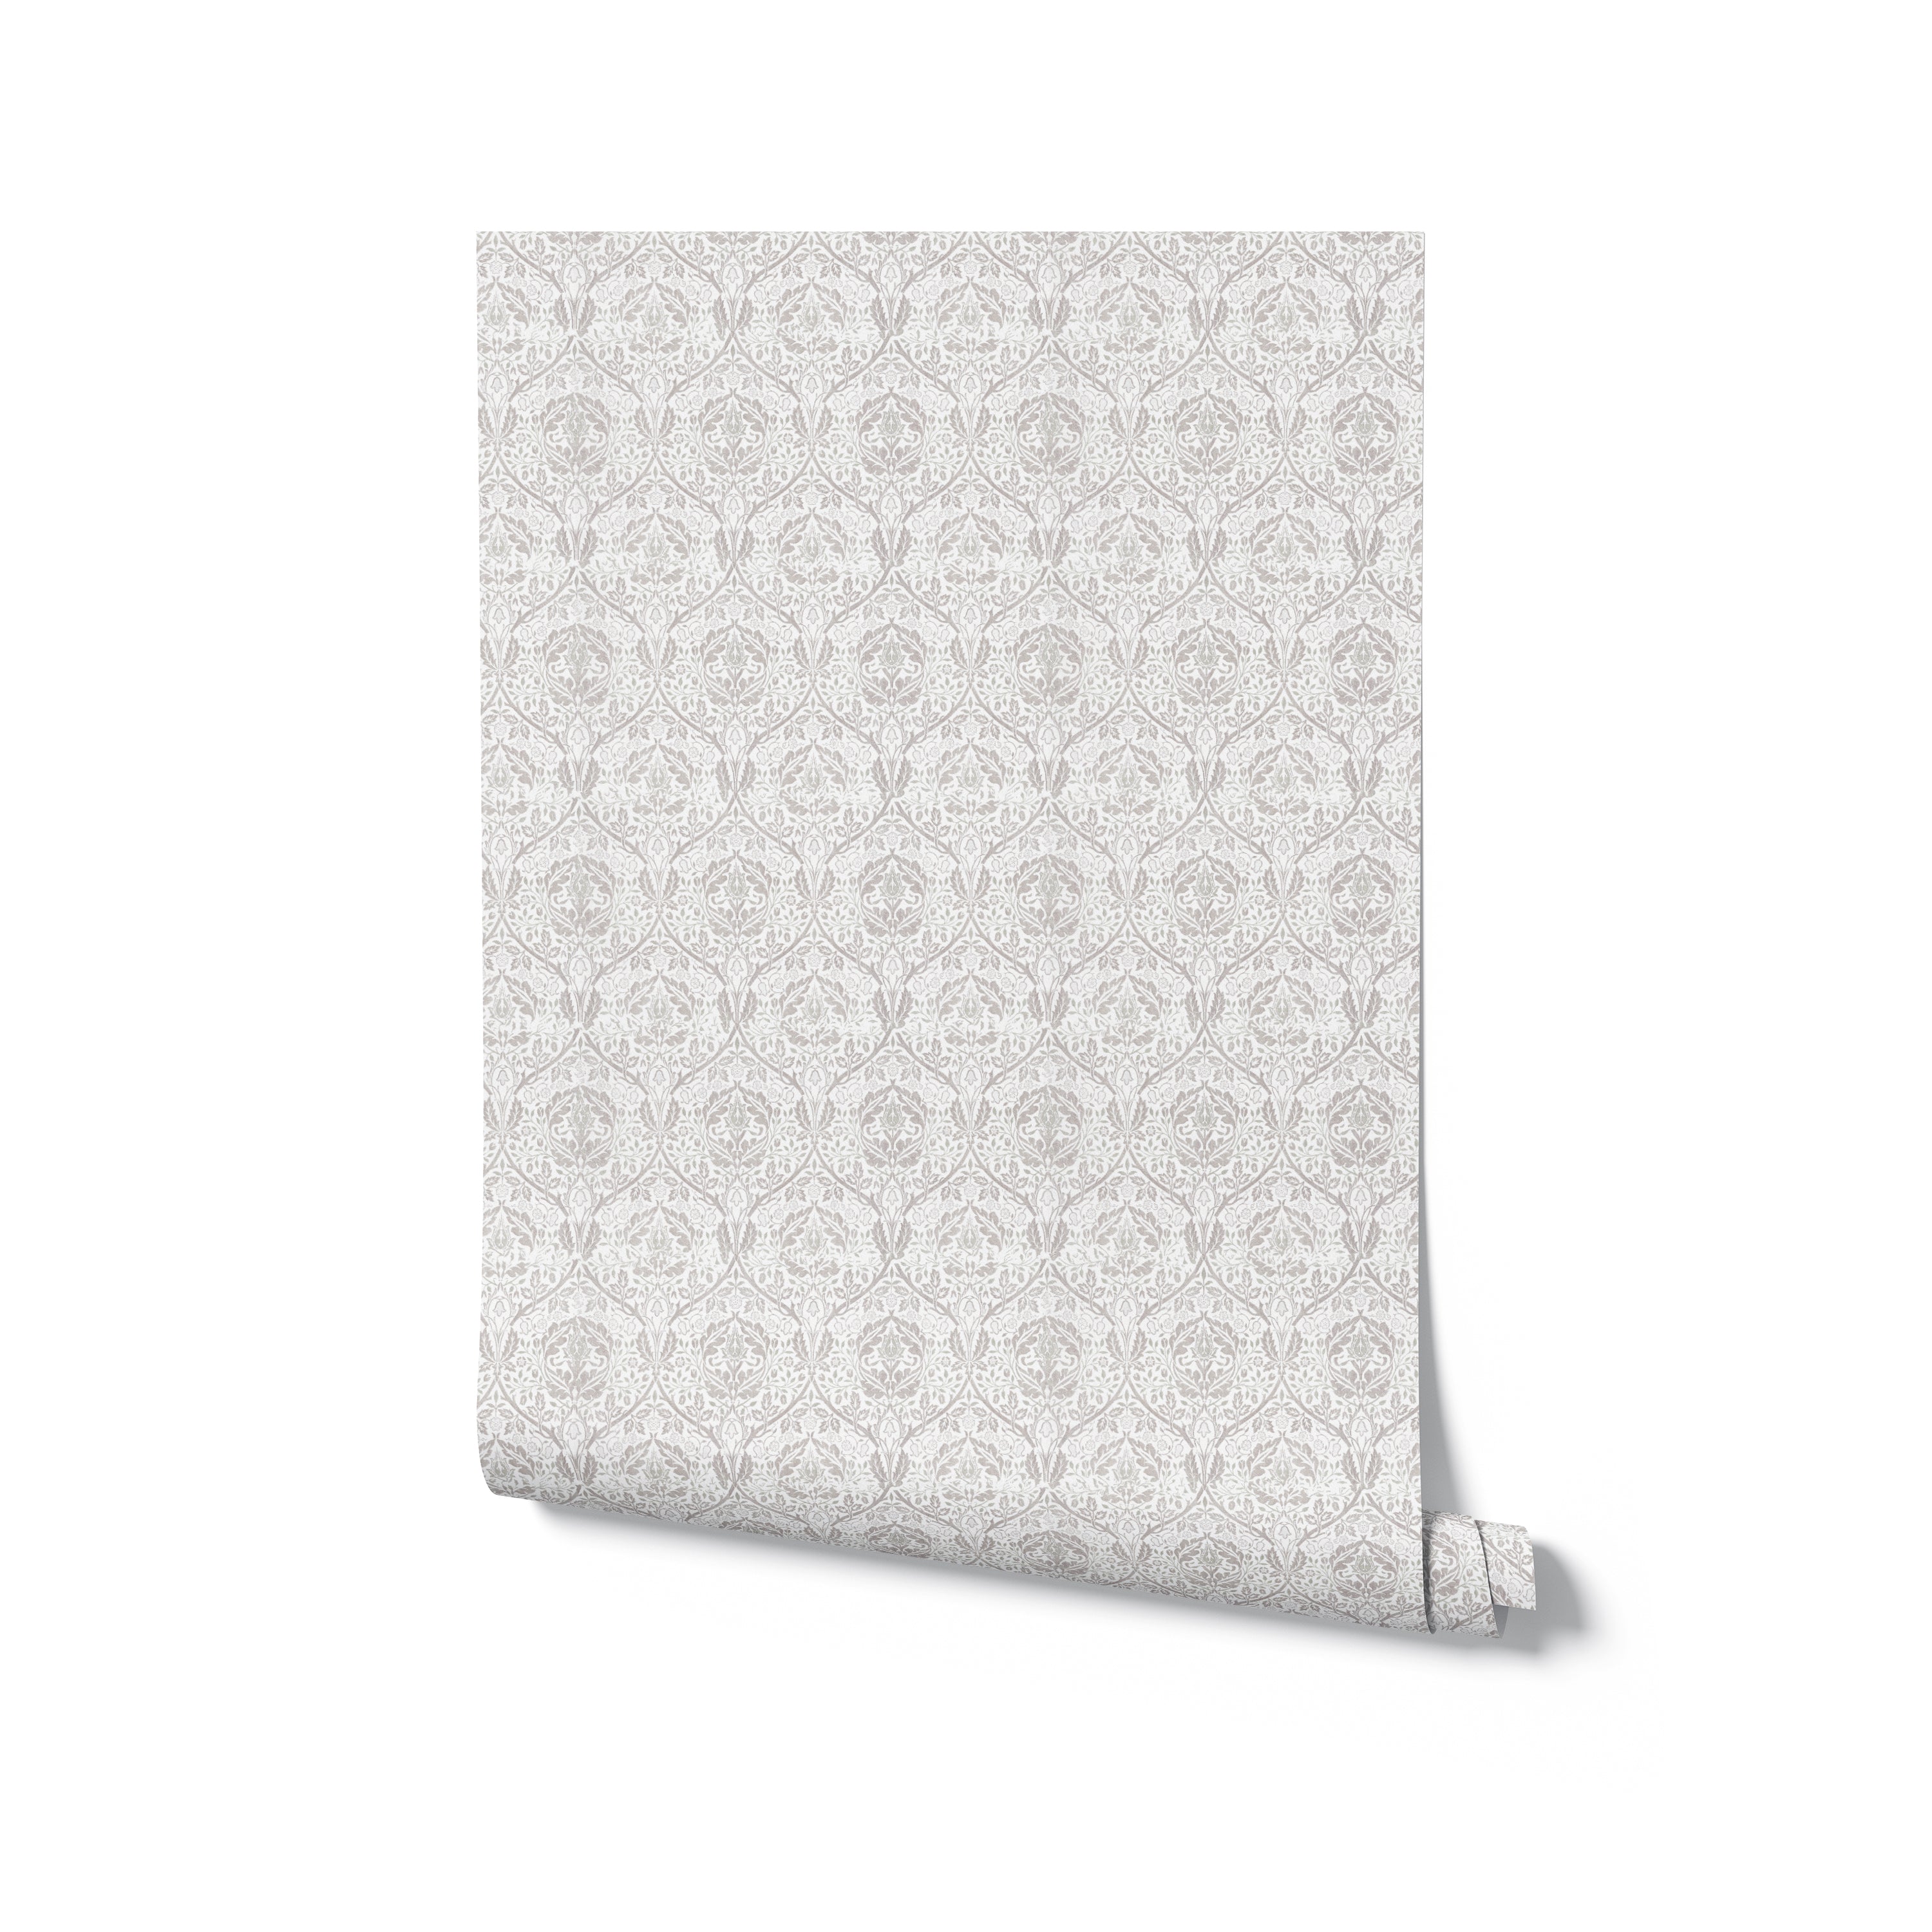 A roll of elegant gray and beige floral wallpaper with a detailed and symmetrical pattern. The design is classic, featuring fine lines and floral motifs that are ideal for adding a vintage or sophisticated touch to any room.